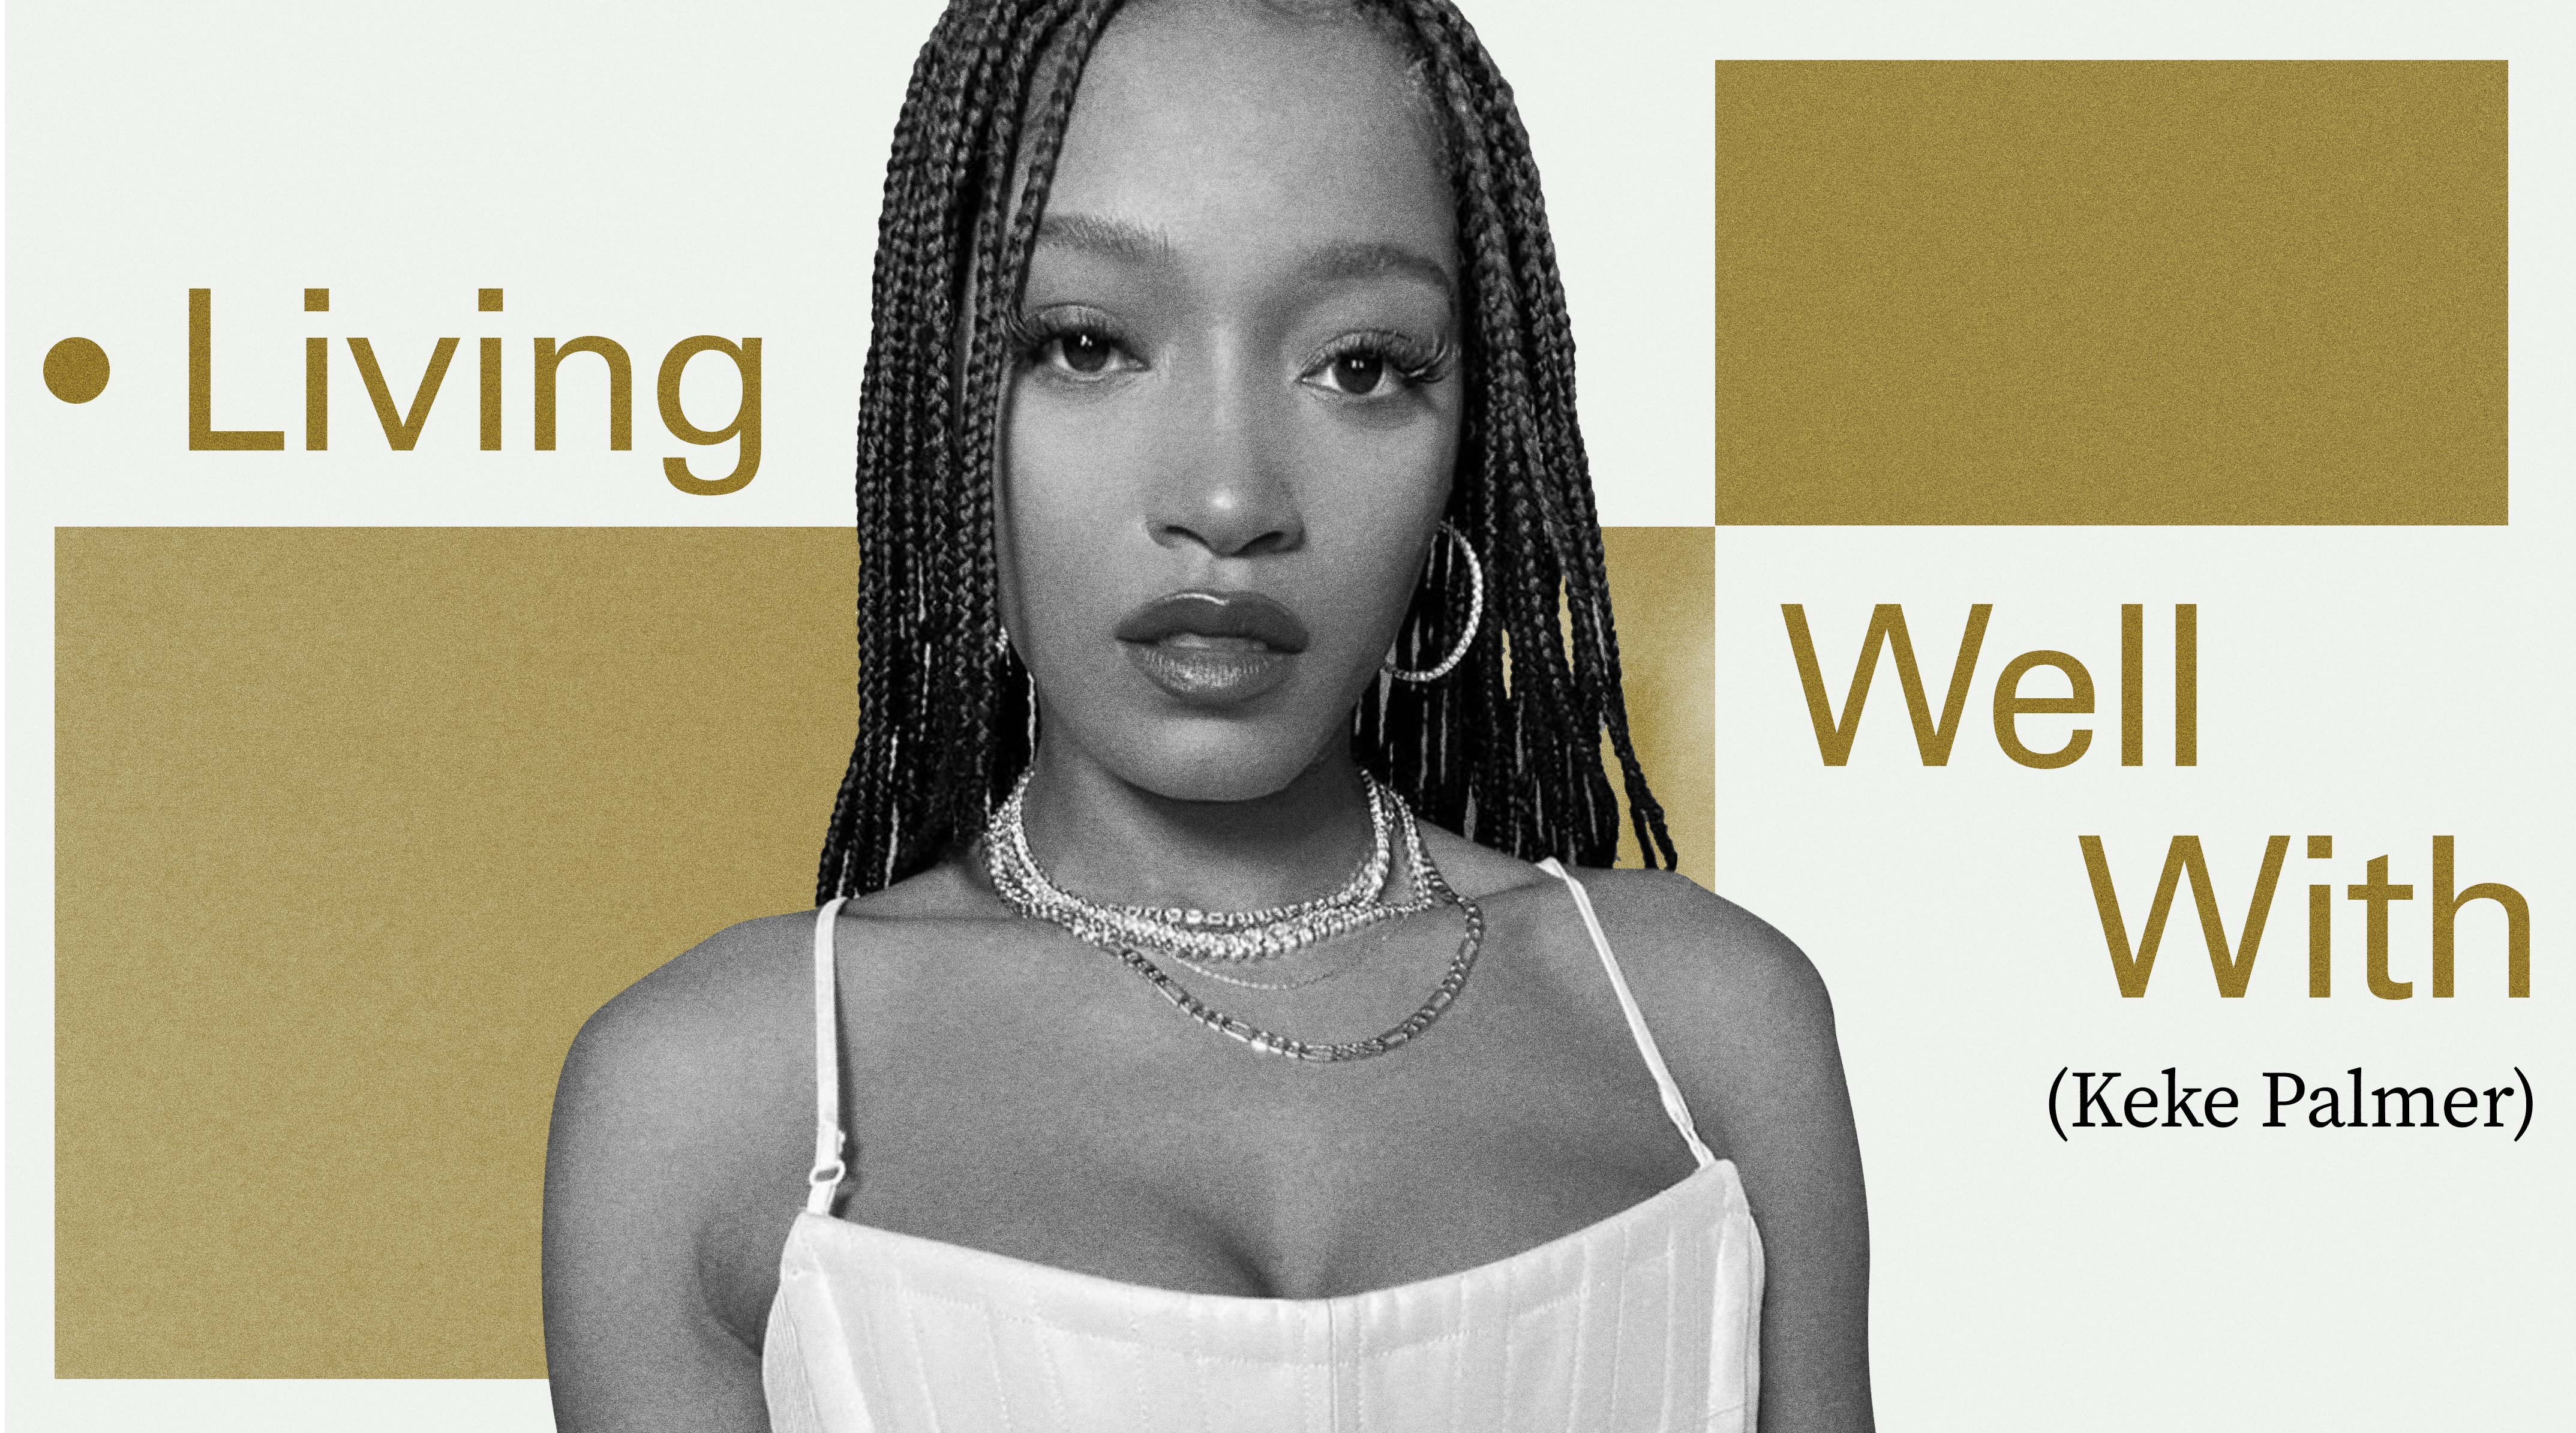 Keke Palmer On Self-Love, Her Favorite Workout, and Saying No